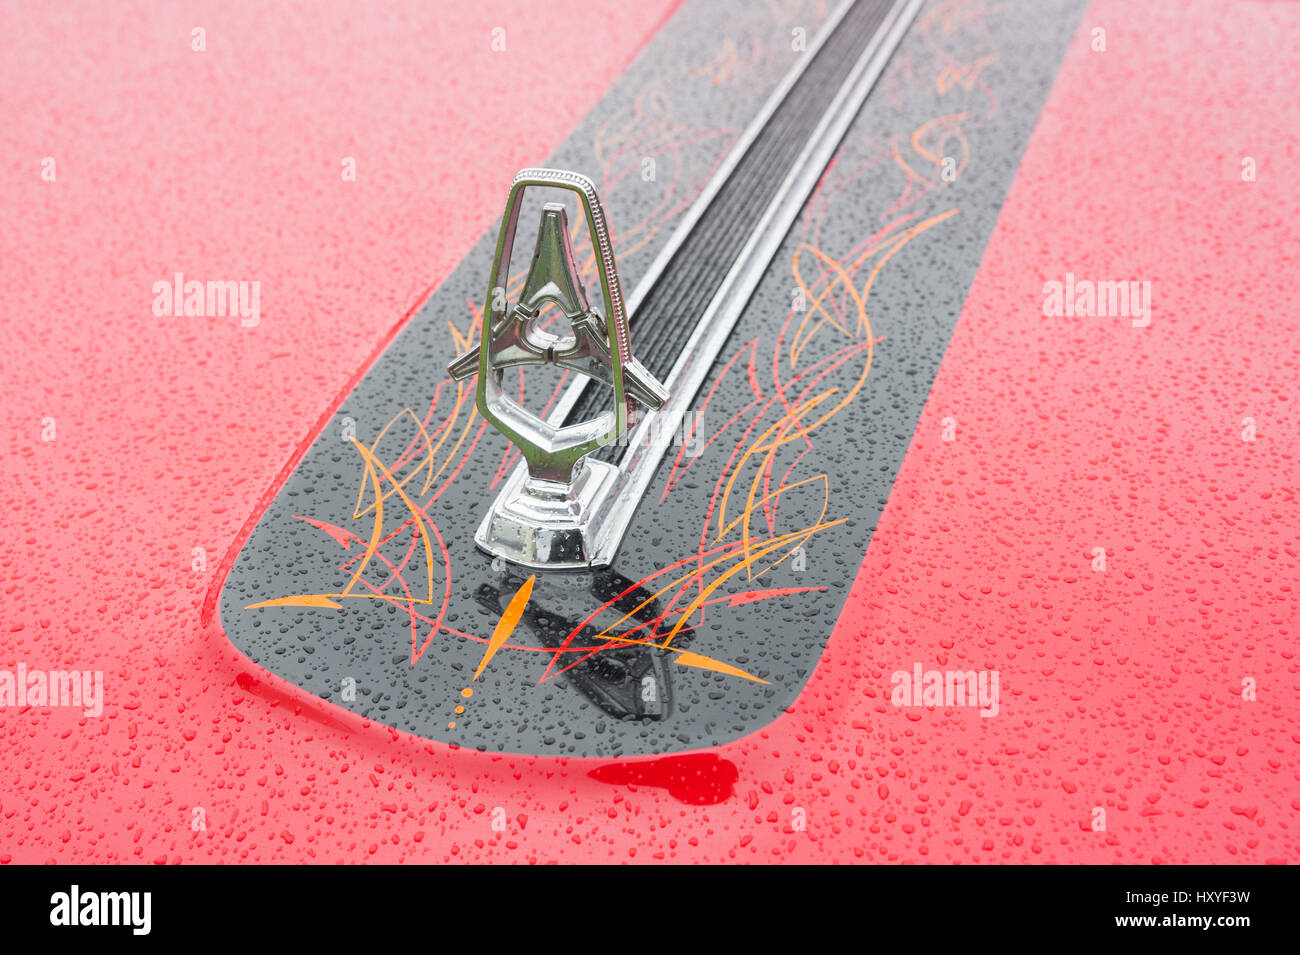 Rushmoor, UK - April 3, 2015: Closeup of a vintage American vehicle hood ornament covered in raindrops. Stock Photo